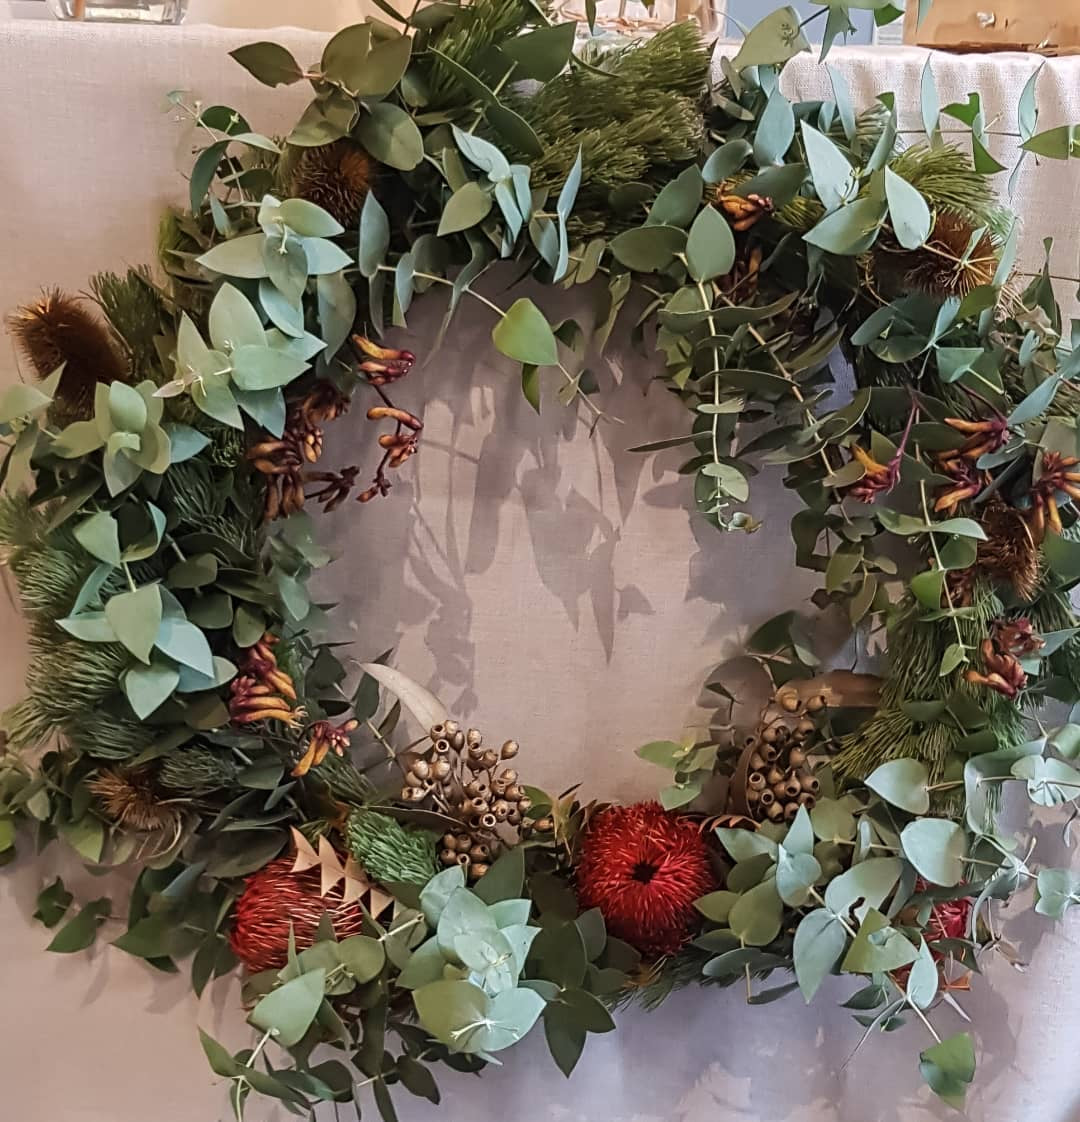 Wreaths for any occasion: Christmas, Birthdays, Weddings and Sympathy